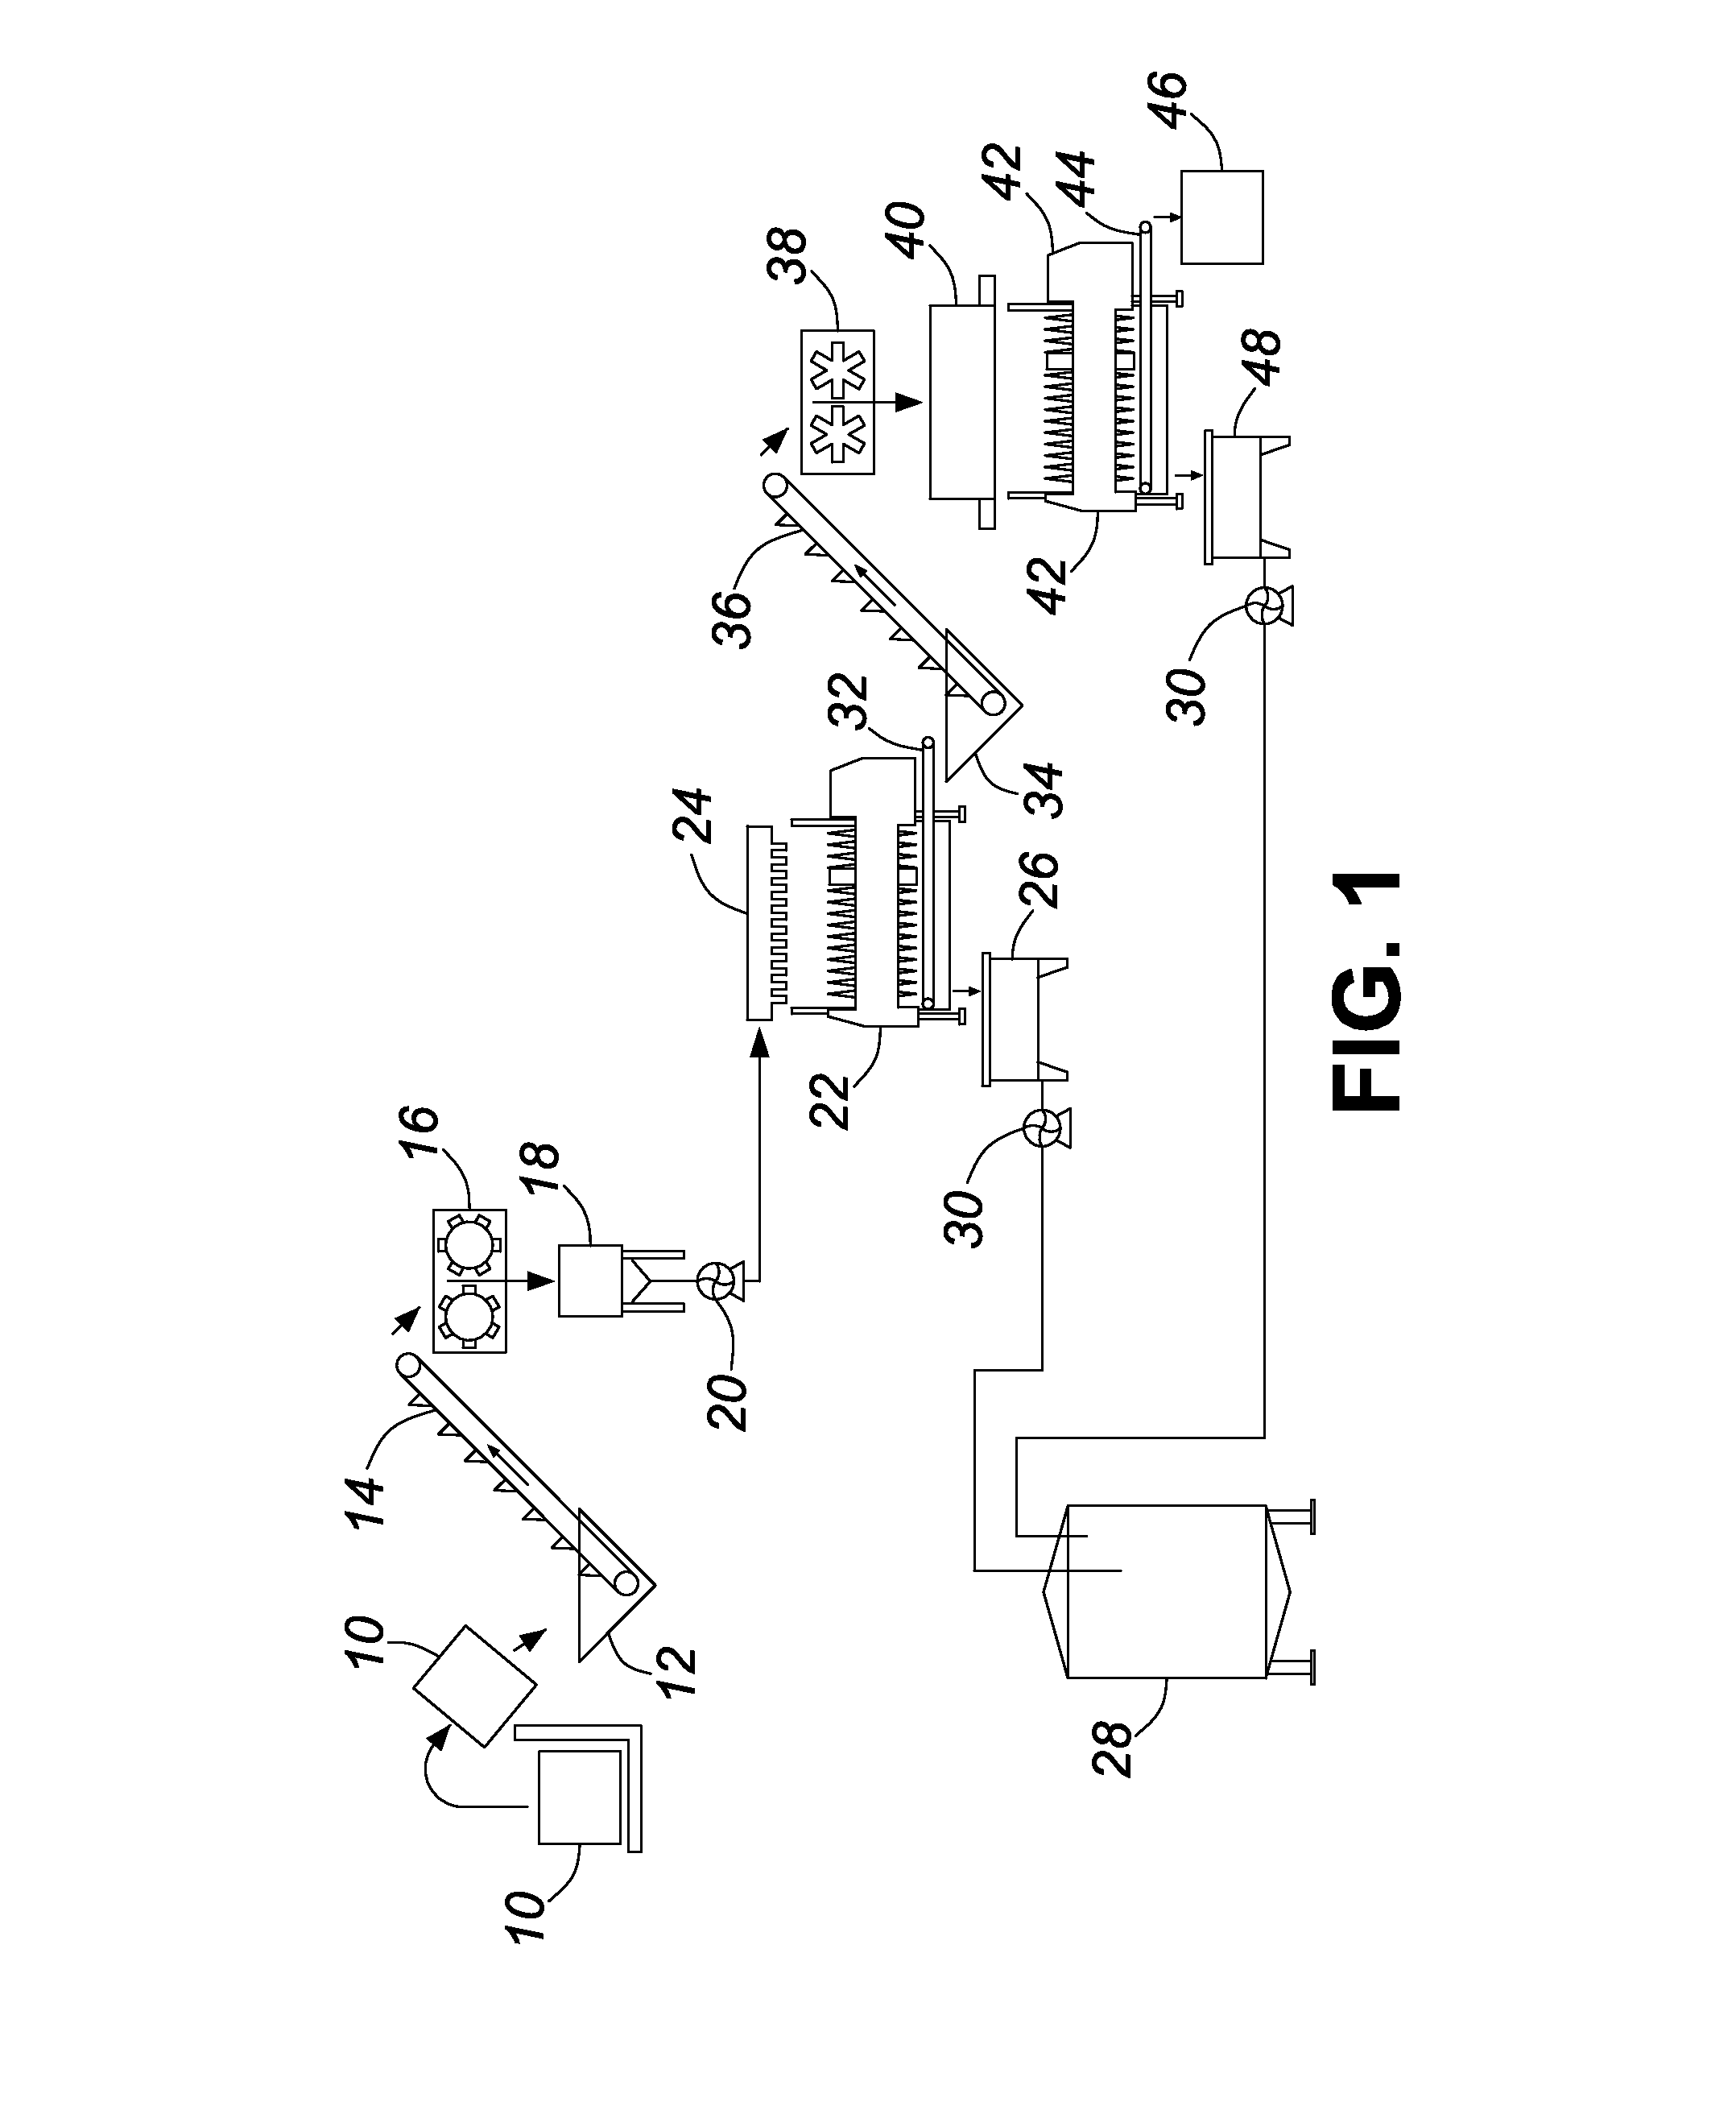 Method and Apparatus for Pressing Fruit